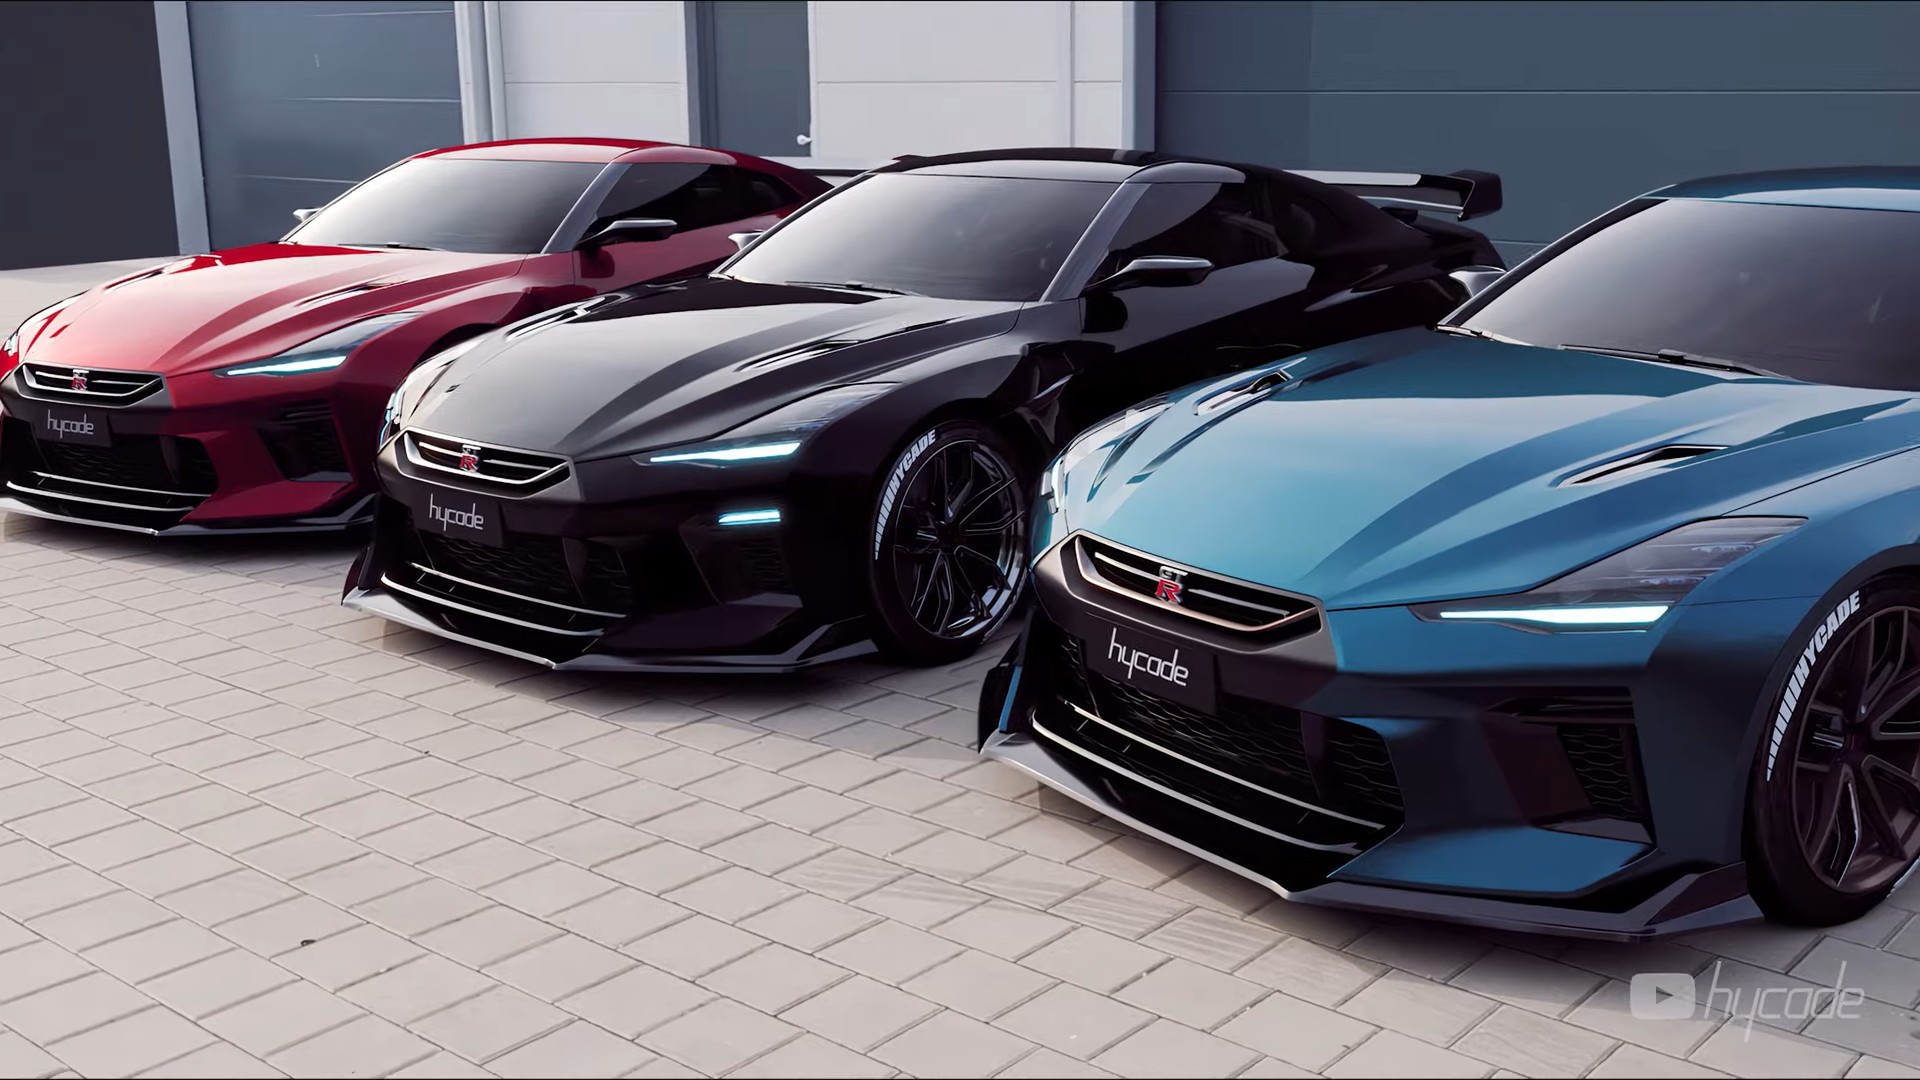 R36 Nissan GT-R: Everything You Need to Know About The Next Godzilla